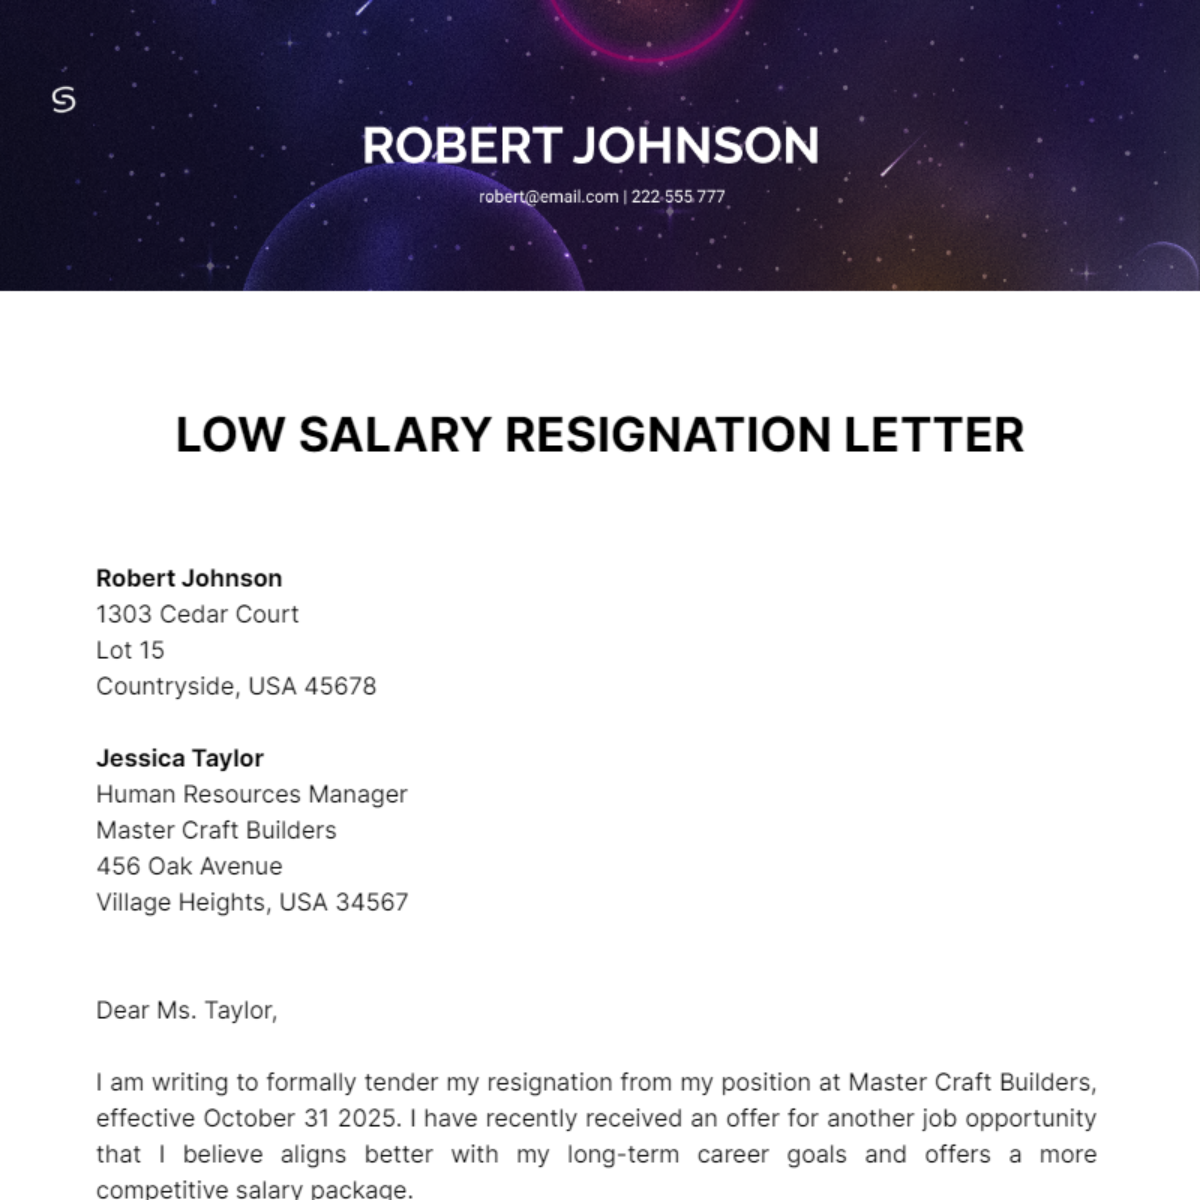 Low Salary Resignation Letter Template